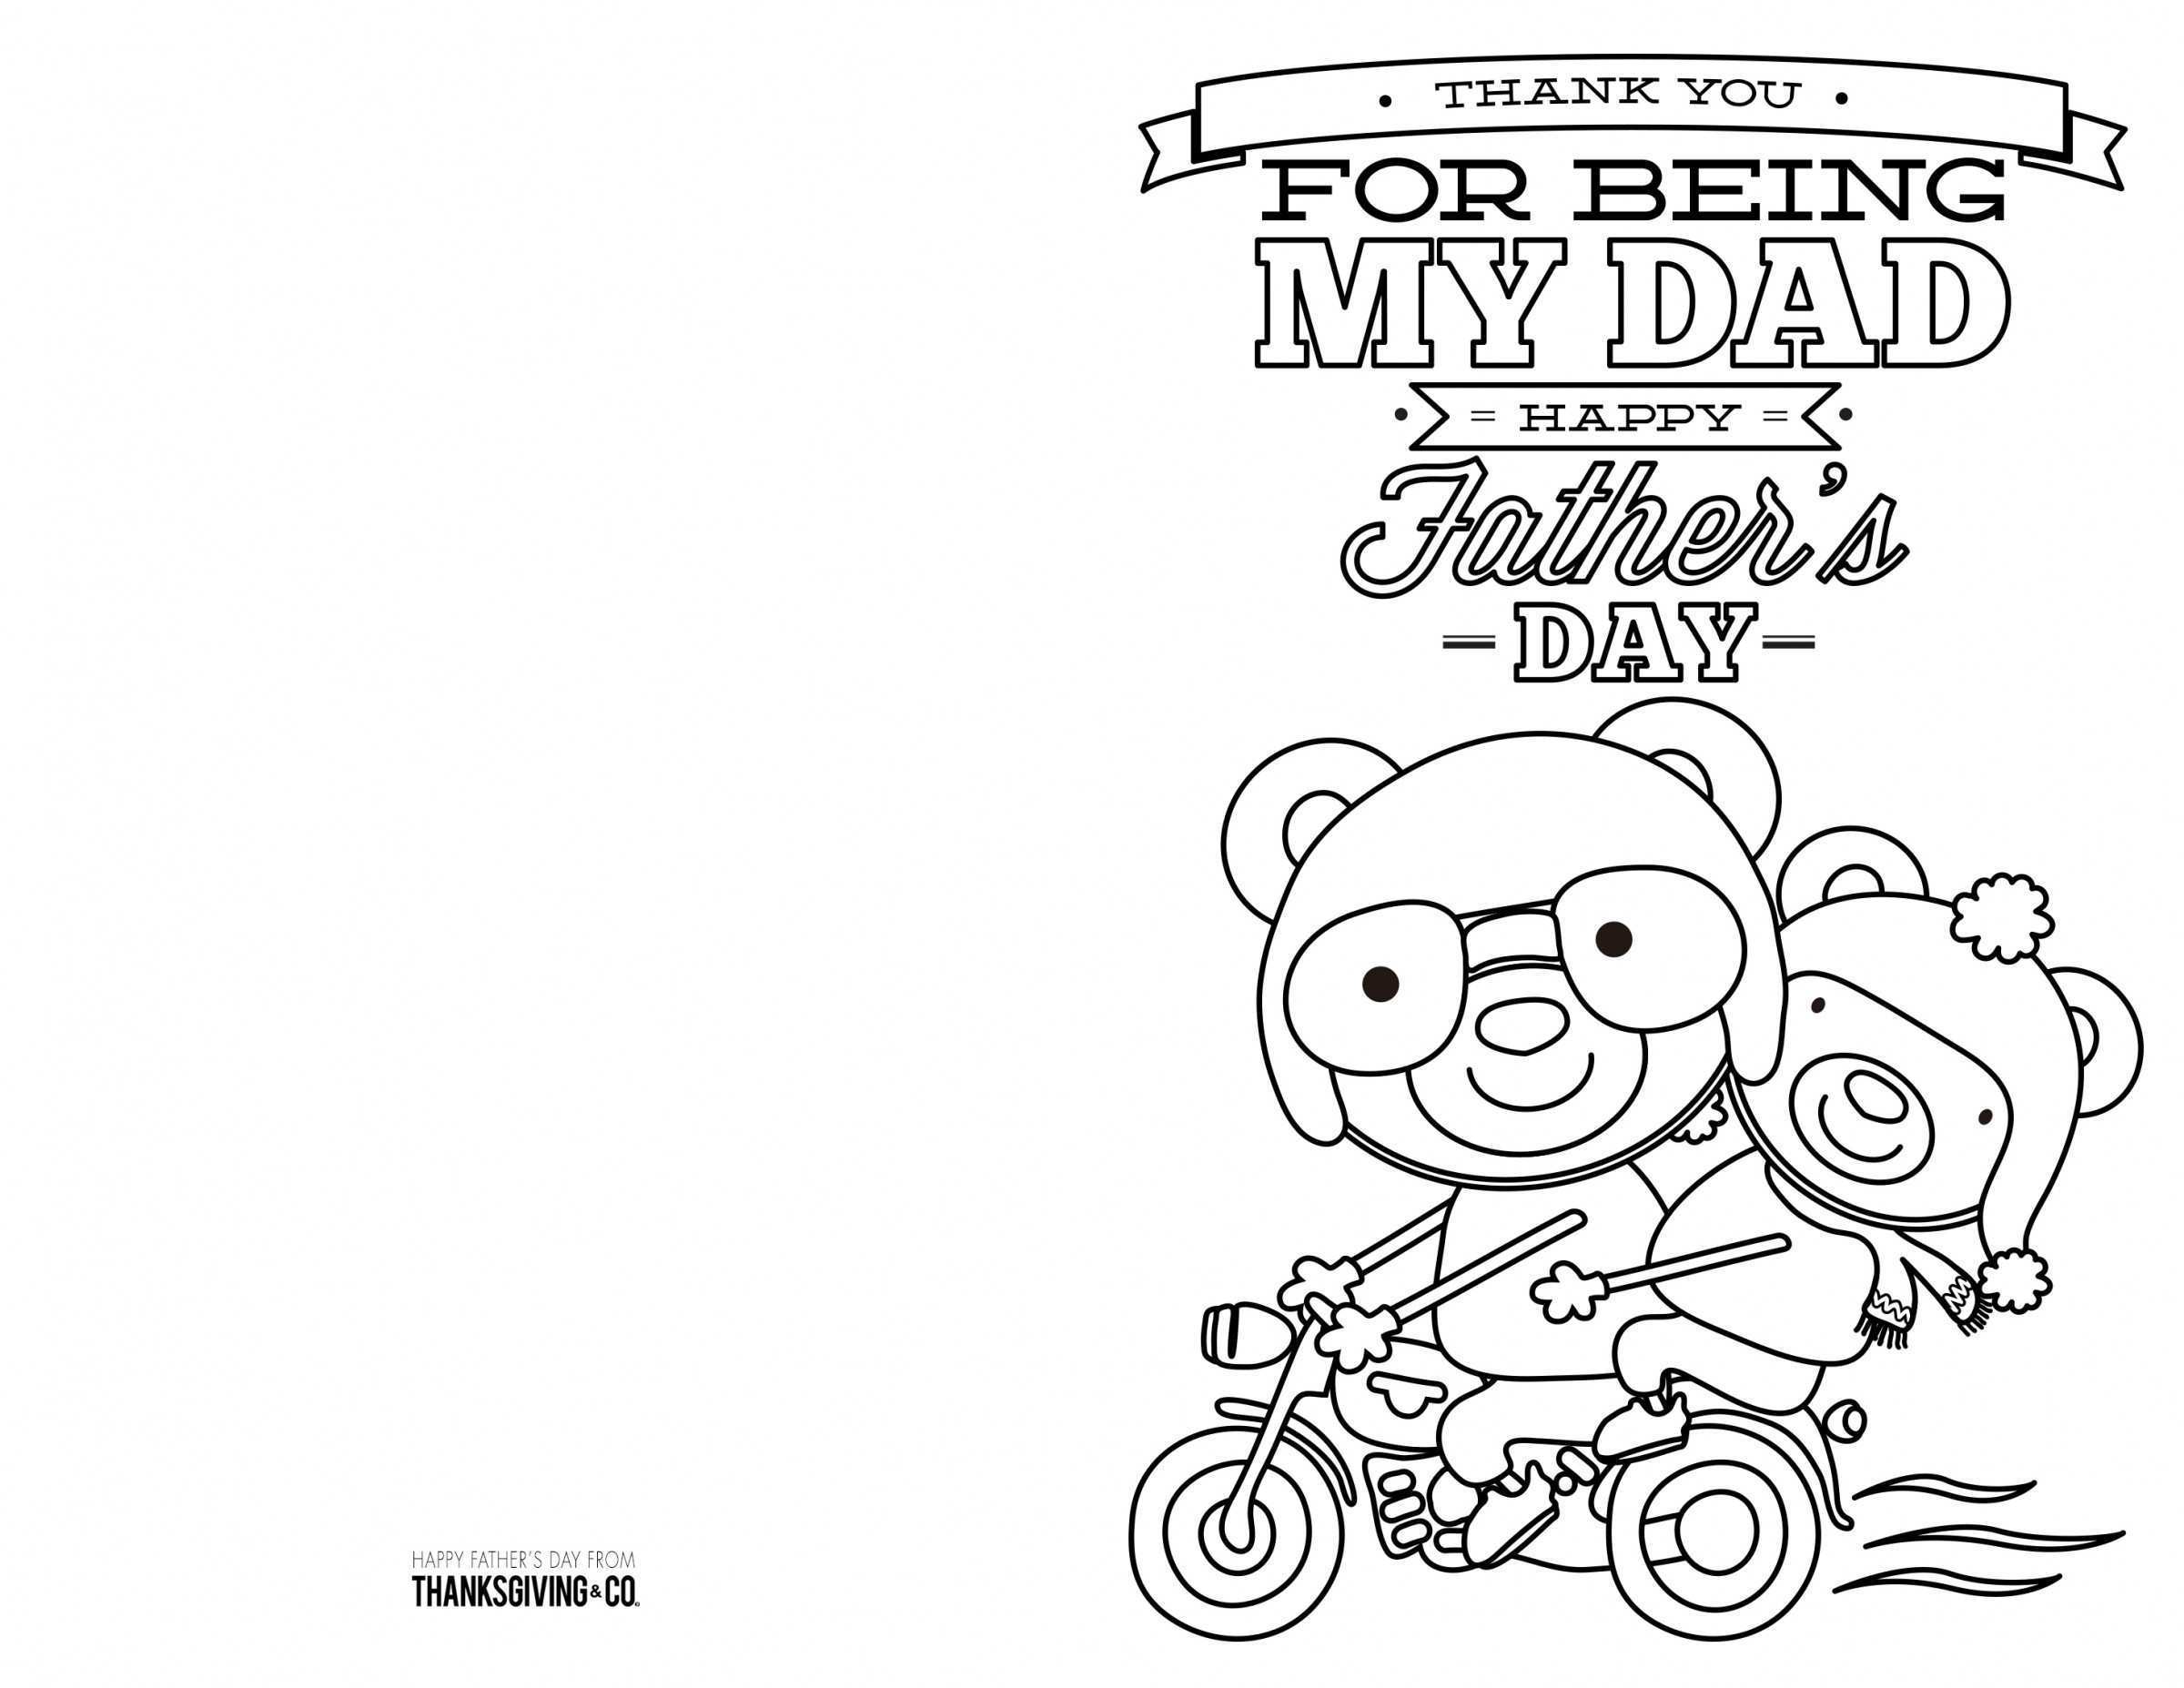 64 The Best Father Day Card Templates To Colour Formating with Father Day Card Templates To Colour